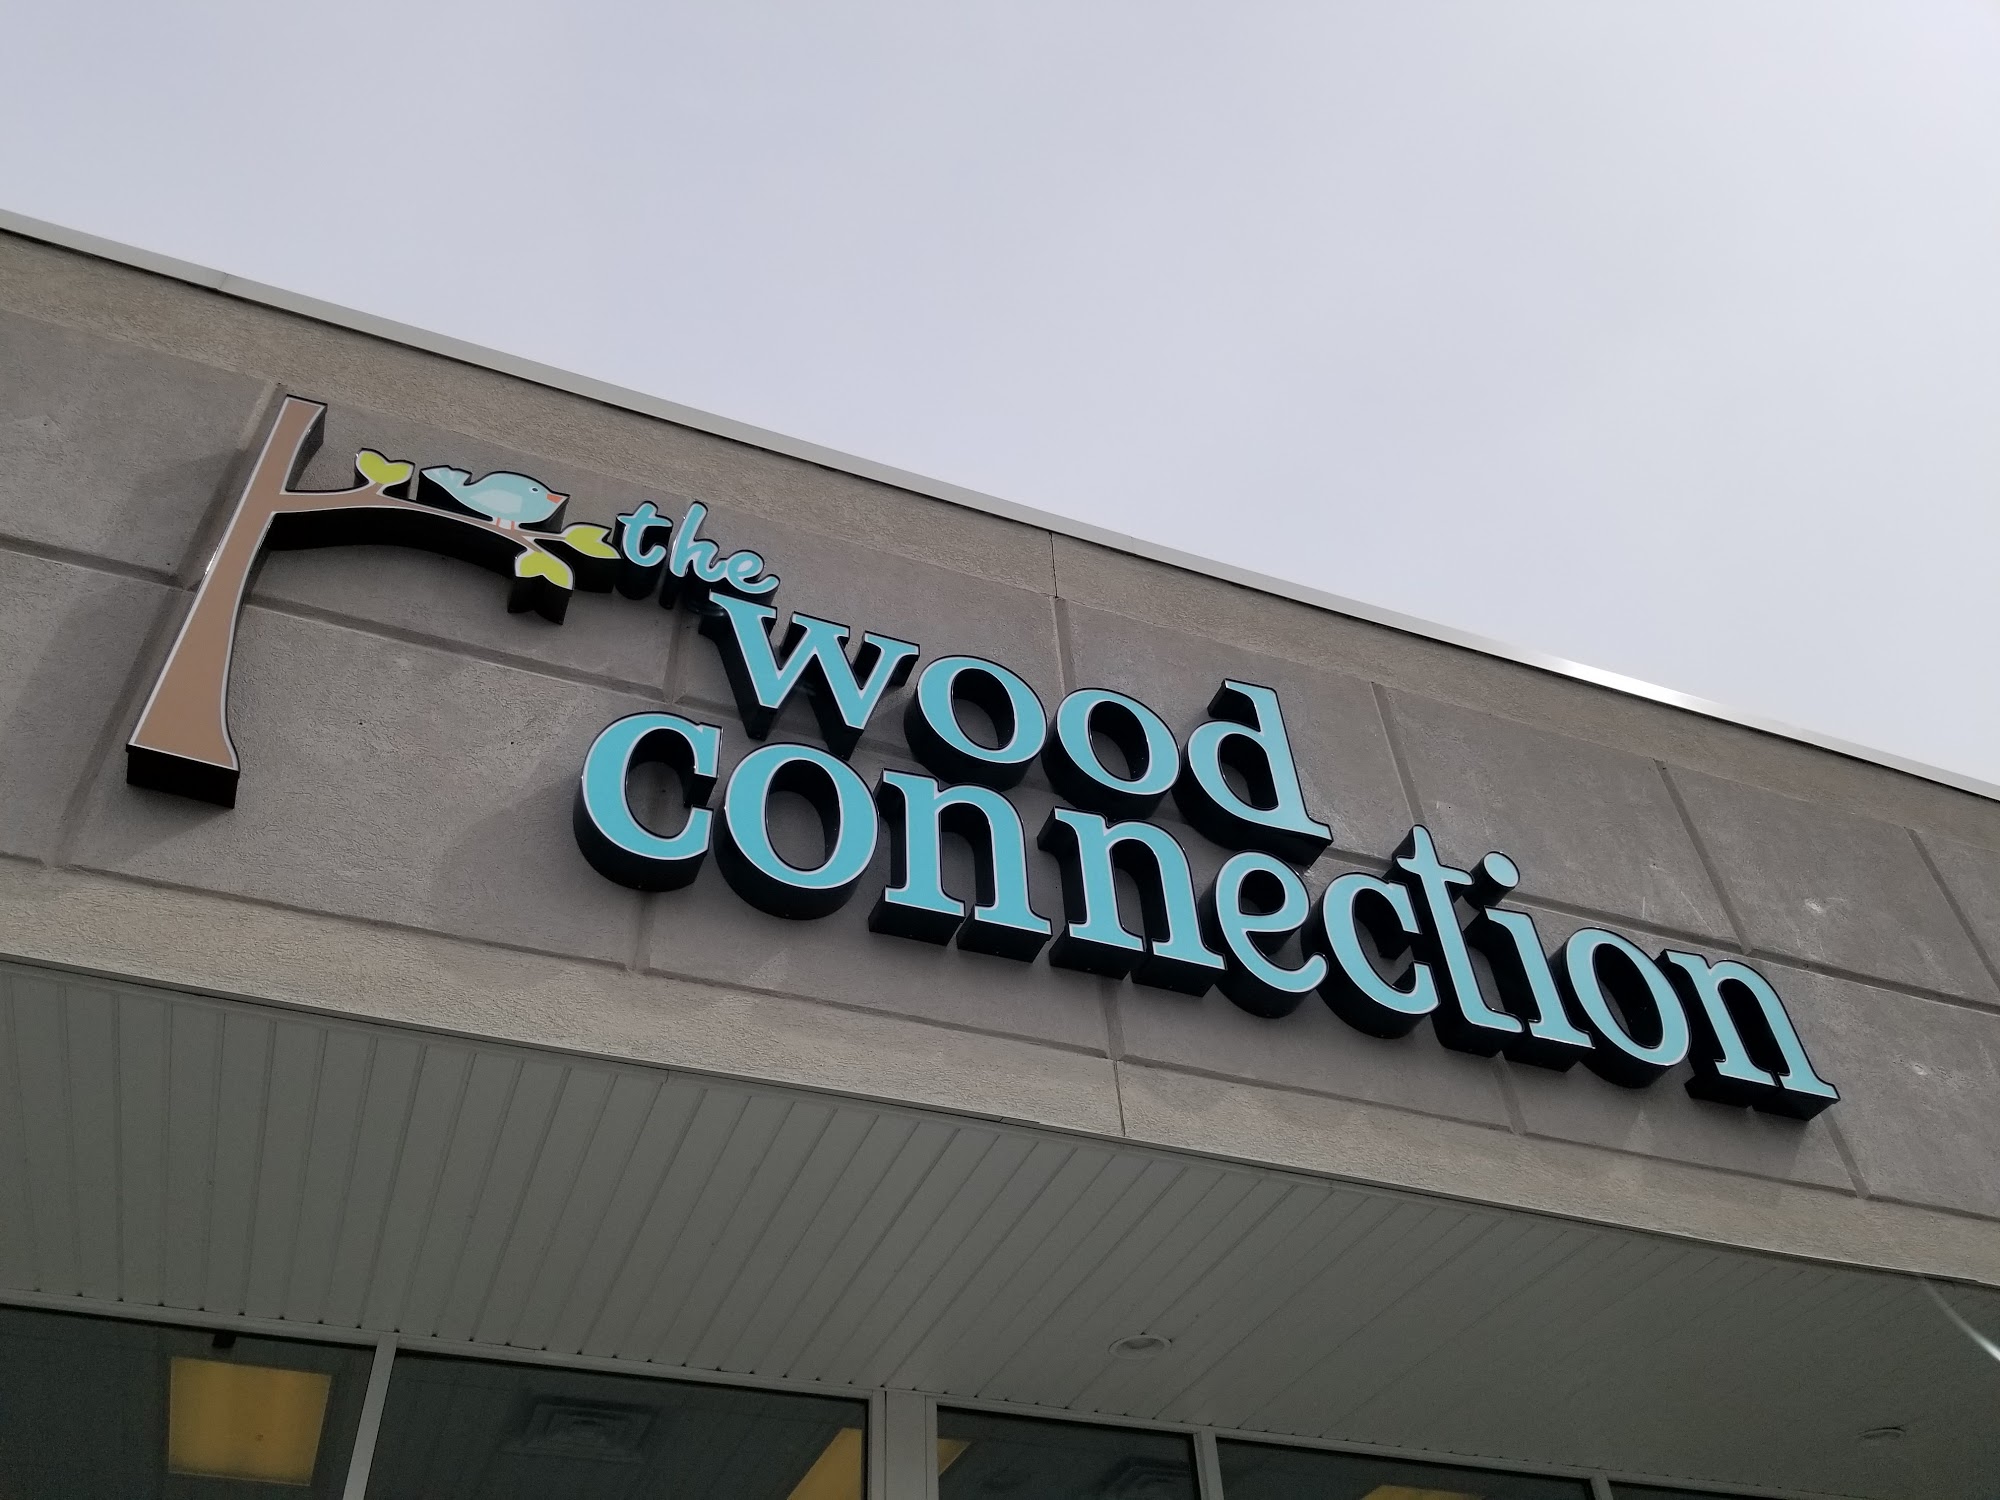 The Wood Connection